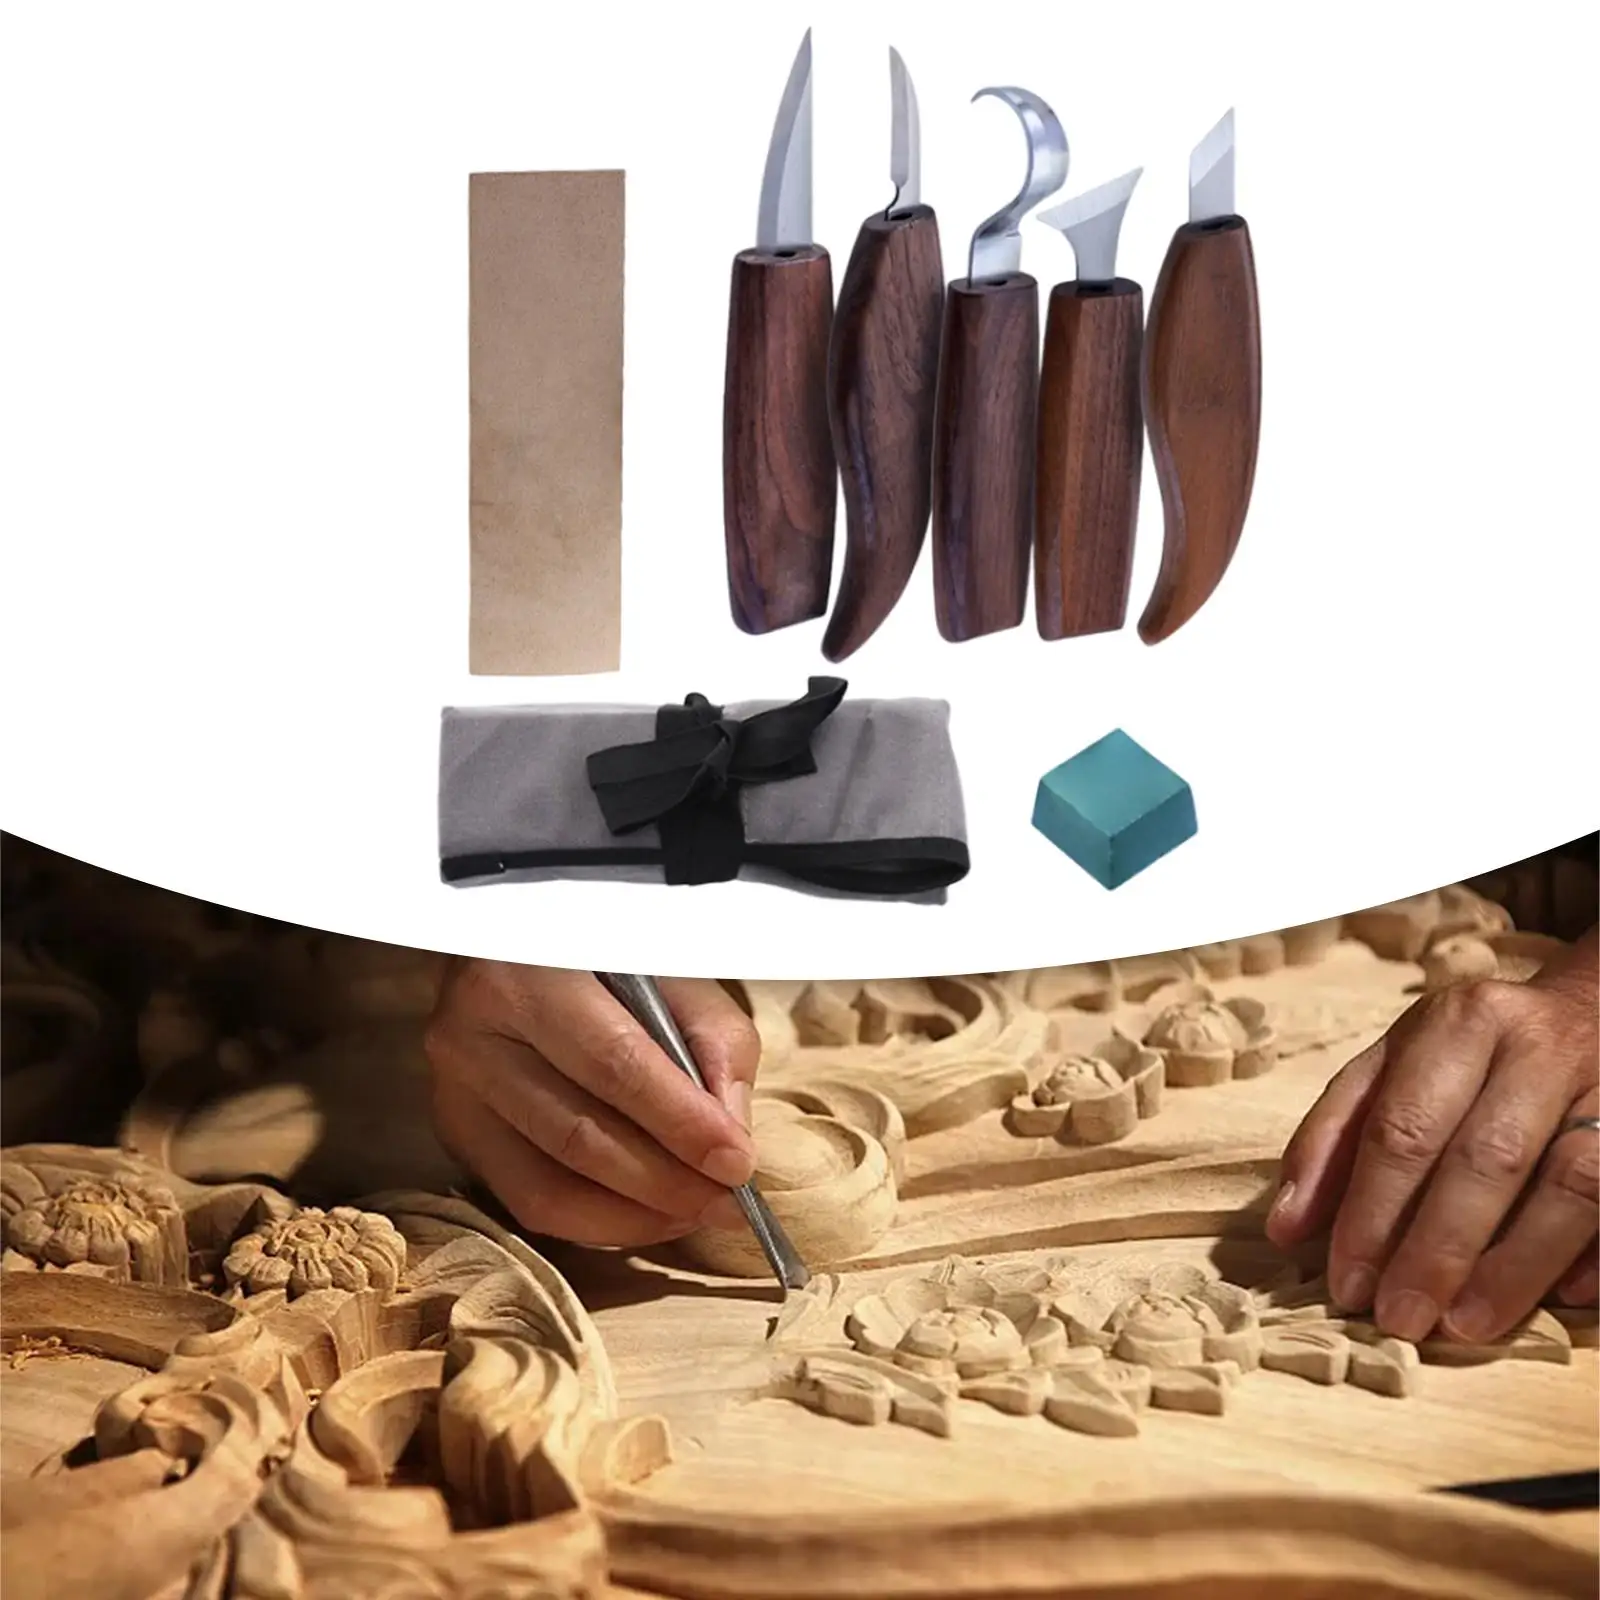 8Pcs Wood Carving Kits Durable Fine Carving Beginners Whittling Kits Hand Carving Knife Set for Paper Carving Plaster Carving